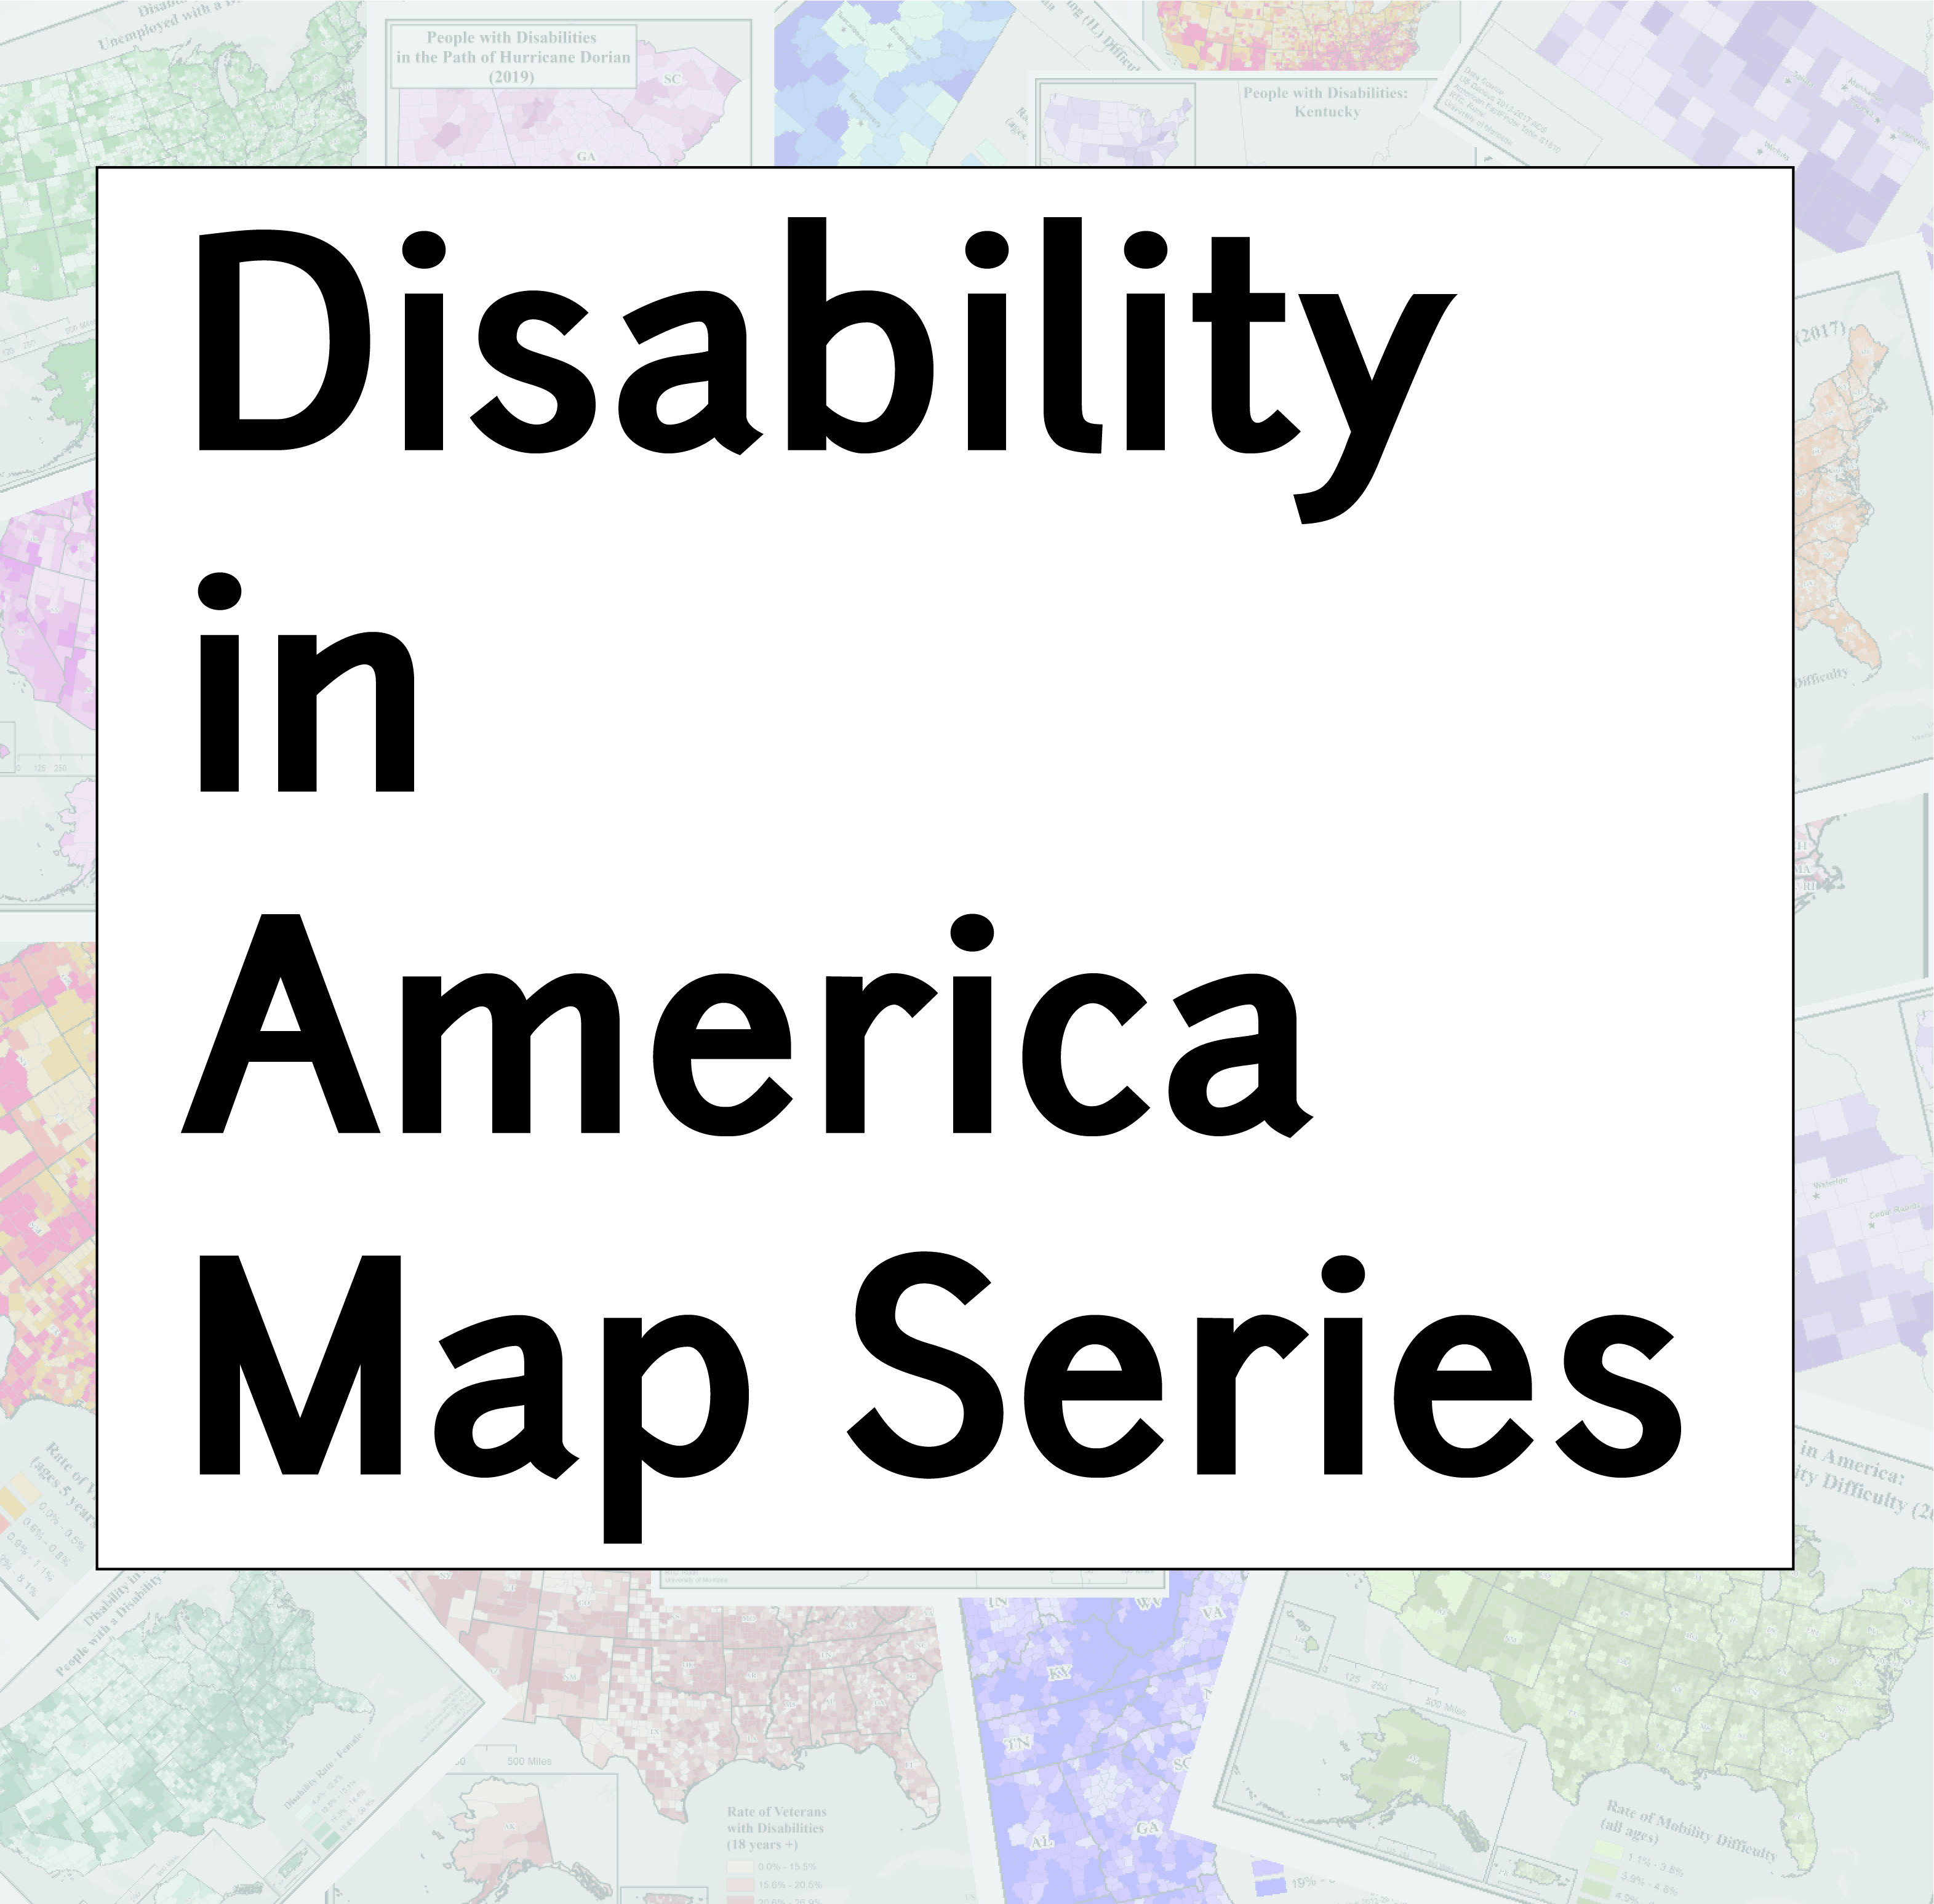 Disability in America Map Series over collage of different disability maps